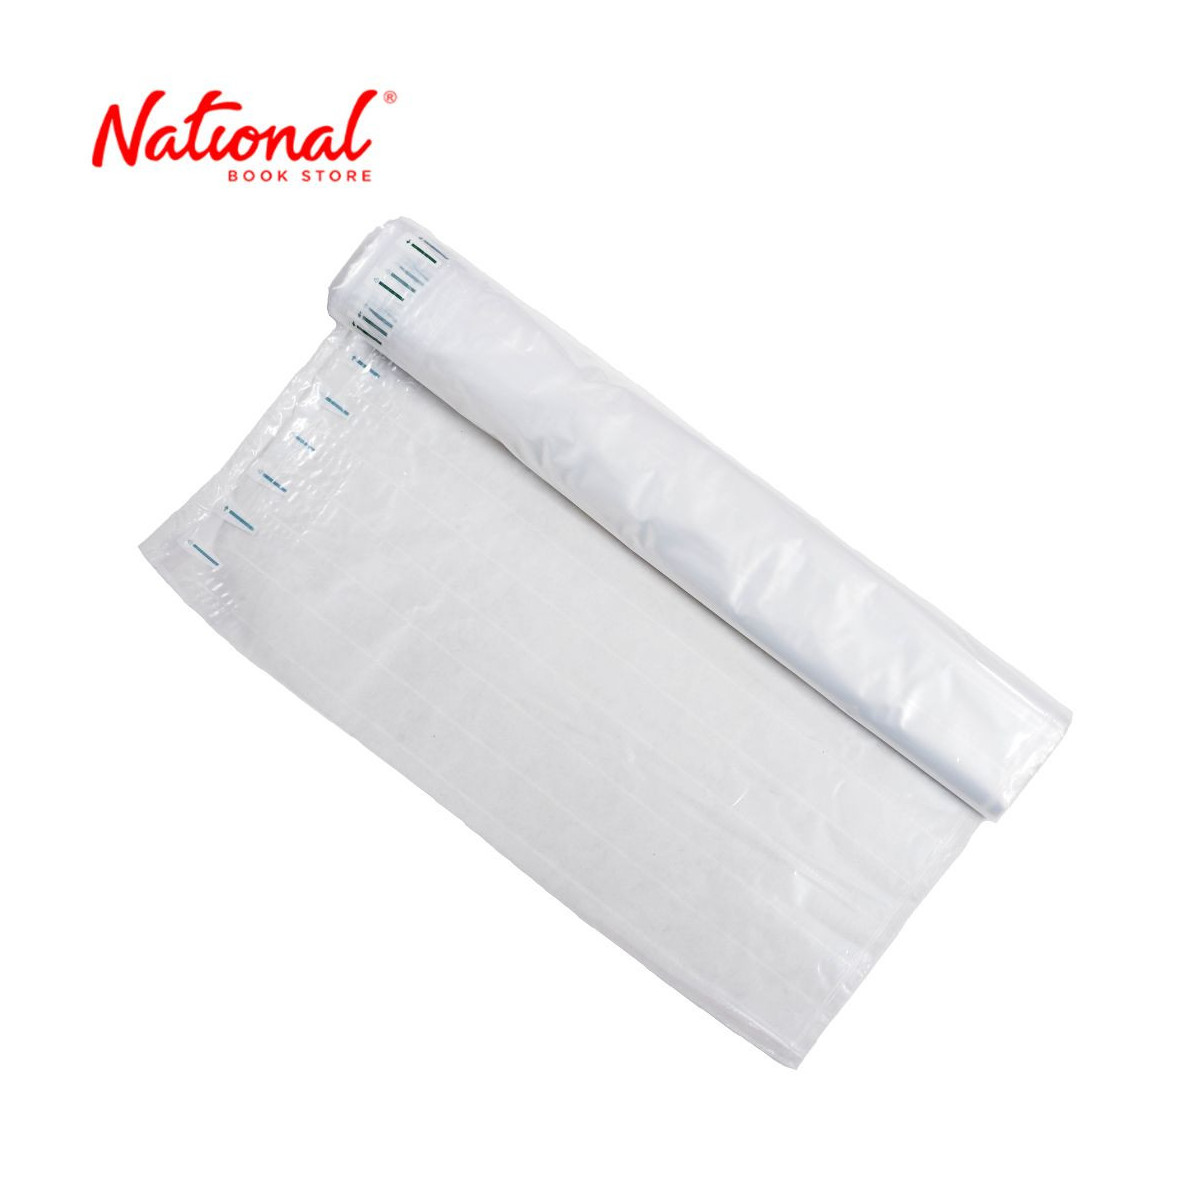 Air Column Inflatable 0.05 Thickness 50cm width 10 meter per roll - Packaging Supplies - Fillers